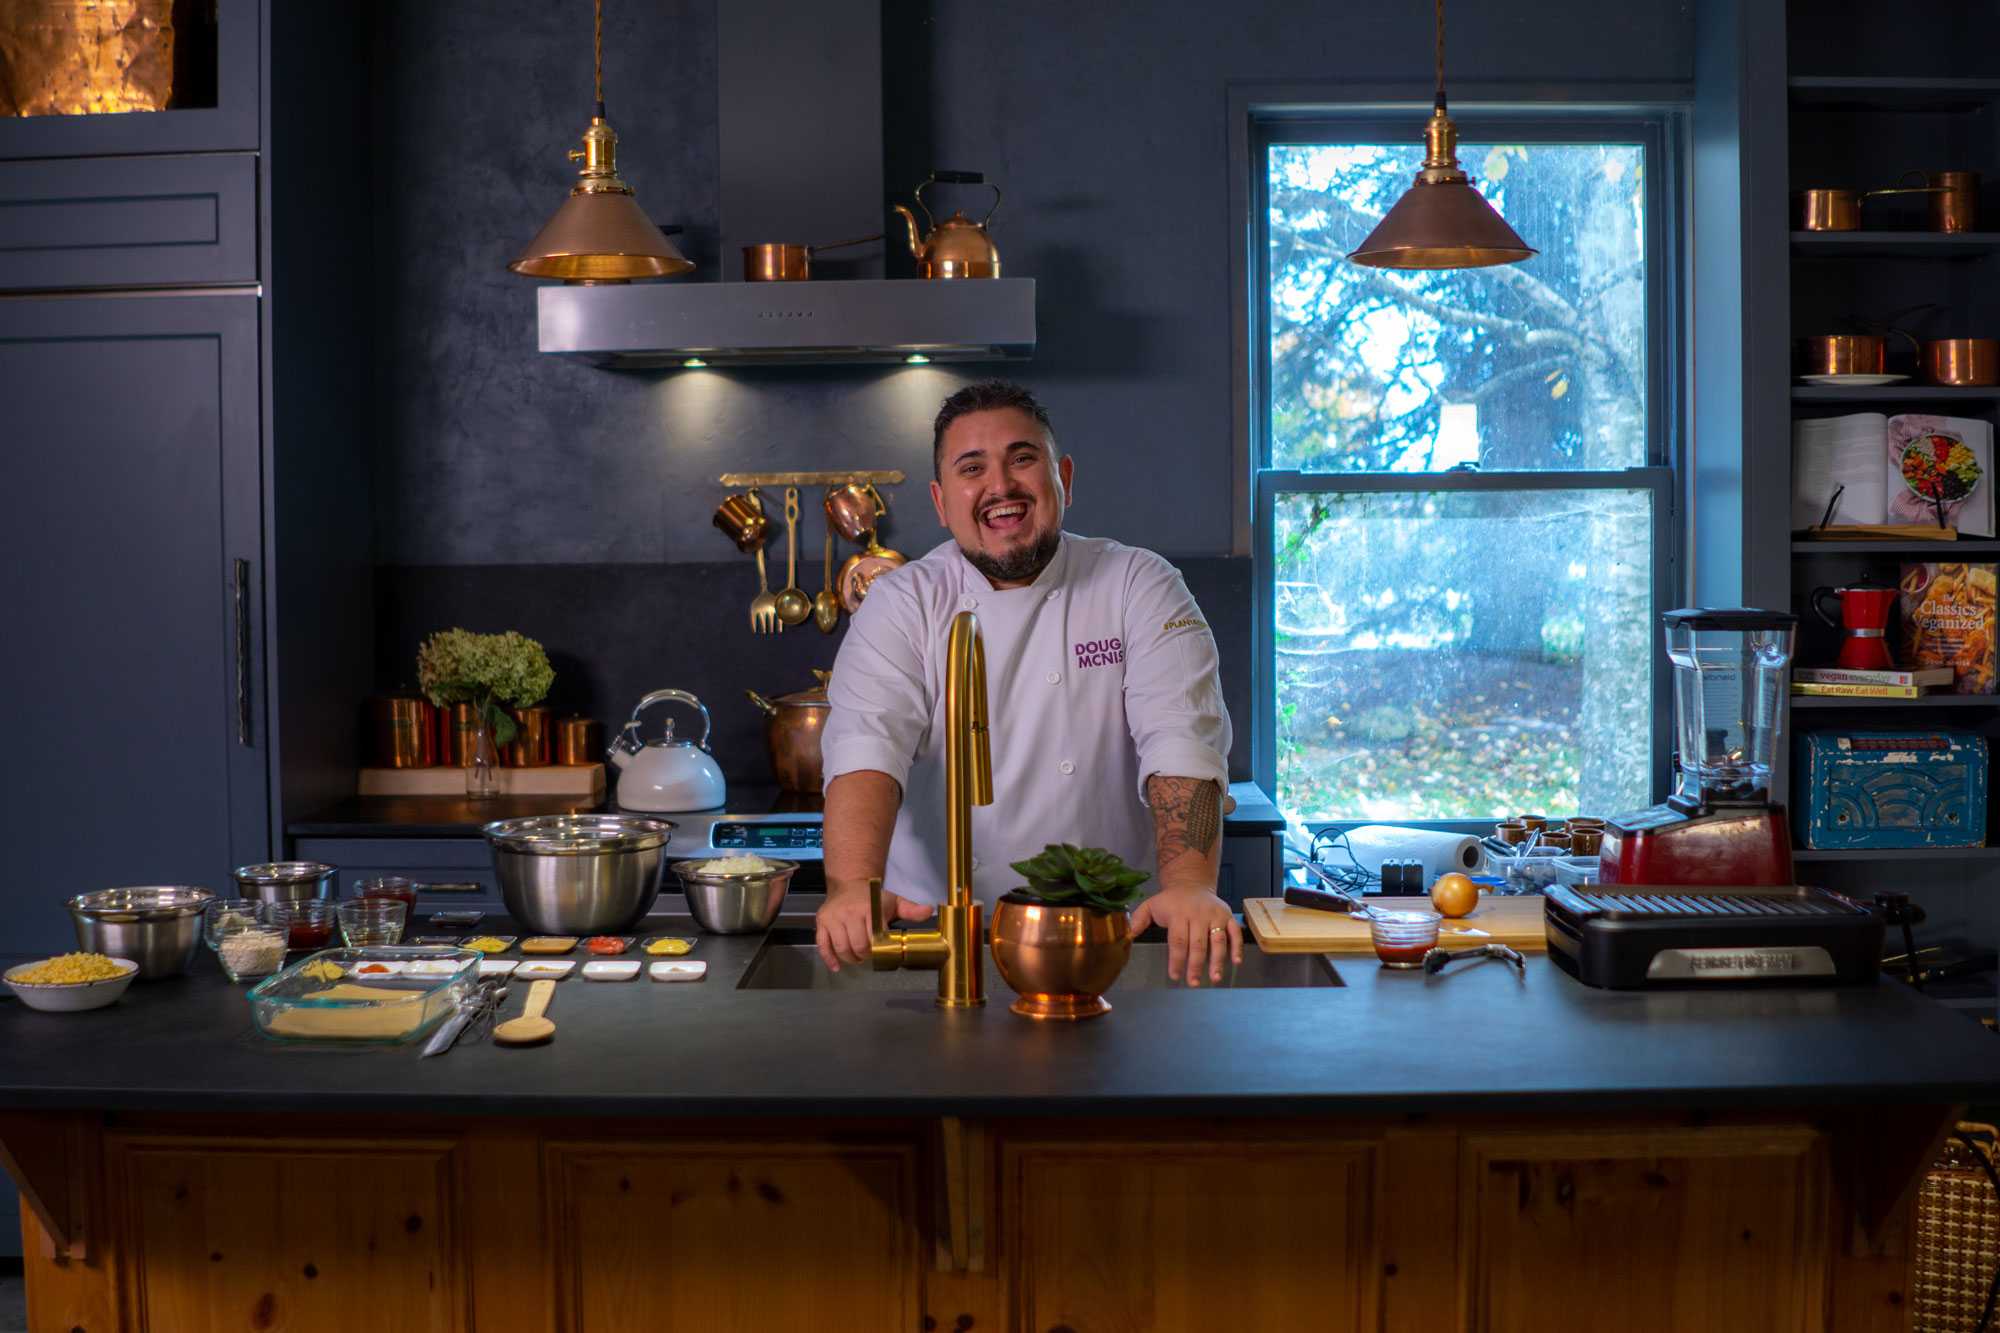 Chef Doug McNish laughs in a kitchen decorated with a black countertop and walls, with gold appliances.